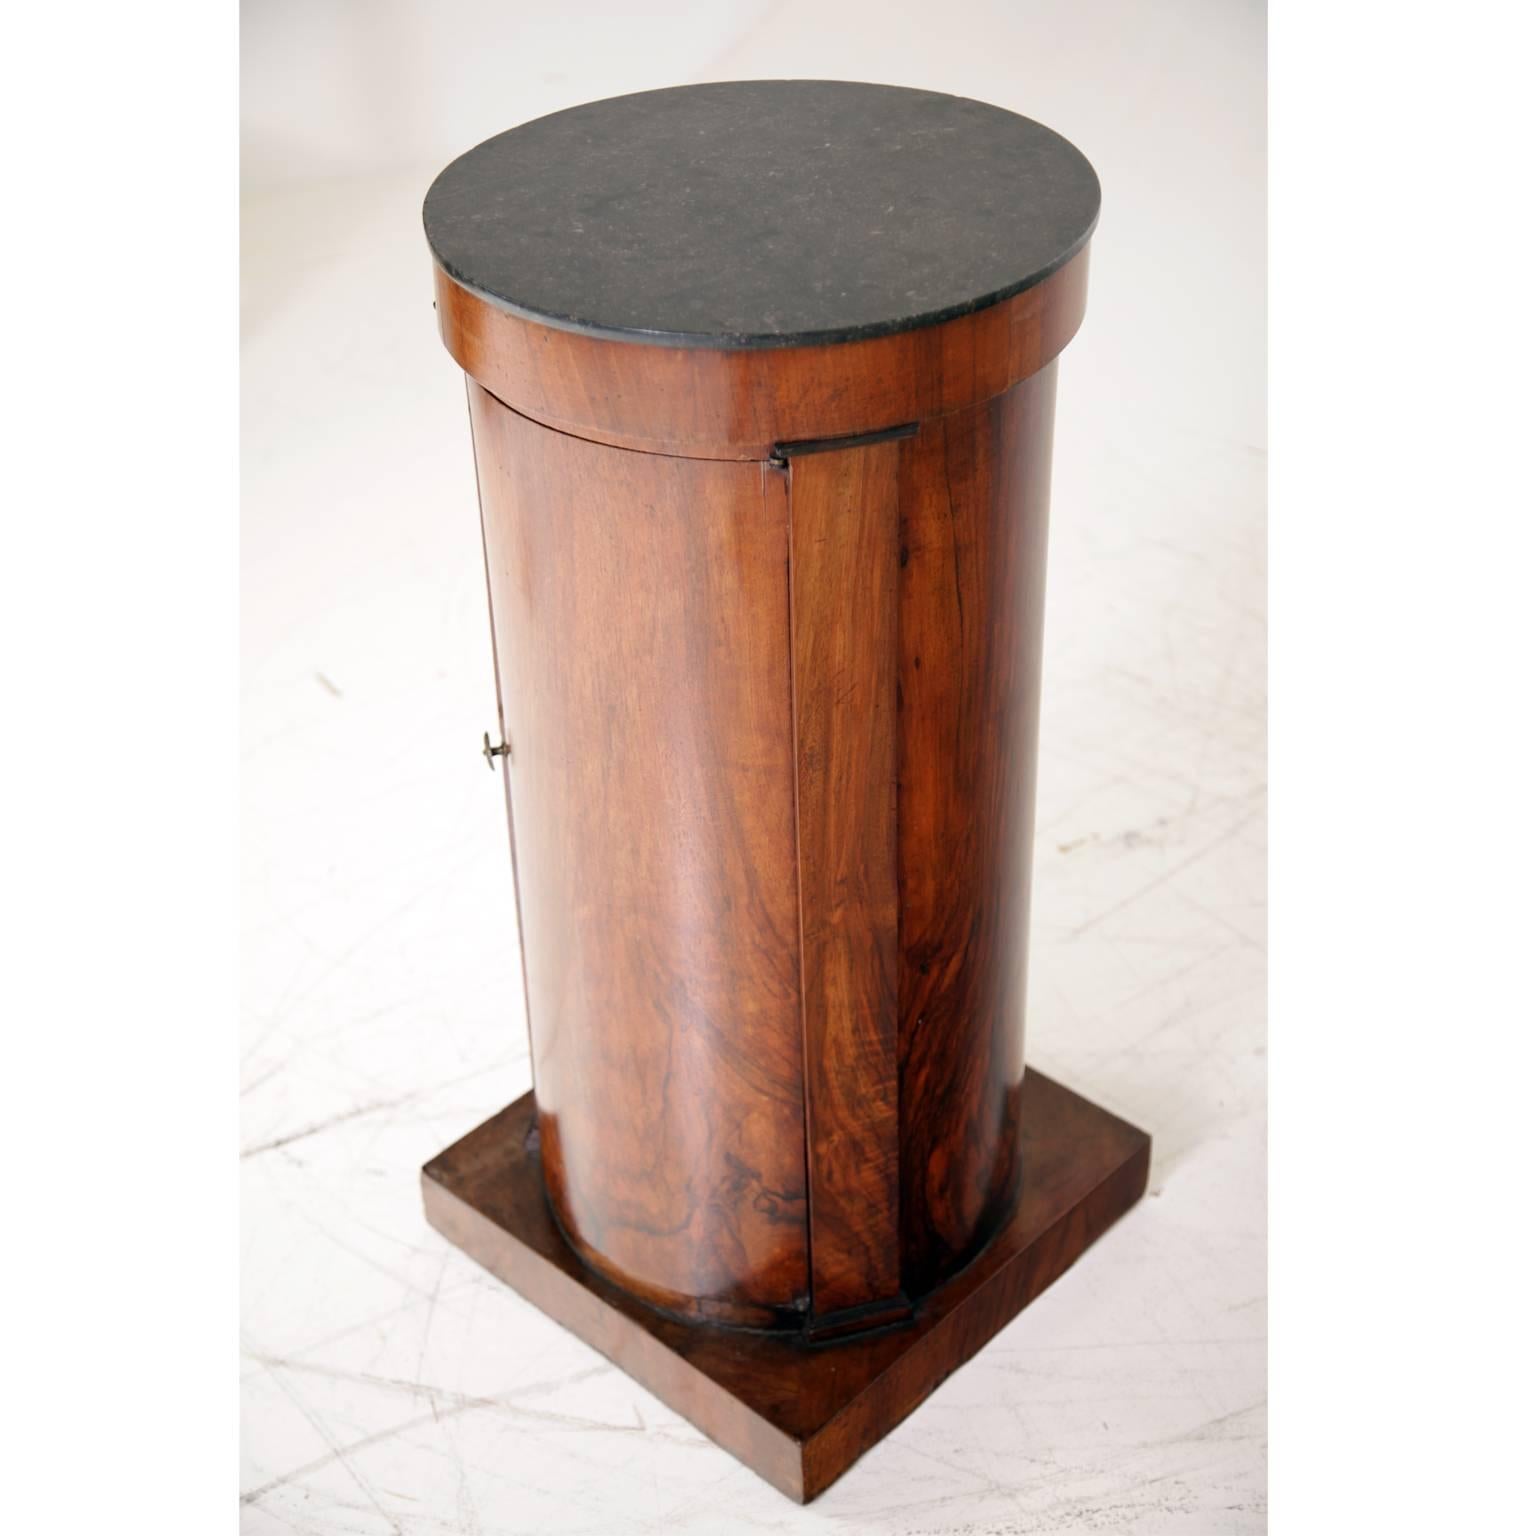 Cylinder-shaped cabinet on a square base with lateral pilasters with ebonized capitals. The top is black marble. The very beautiful cabinet is in an unrestored museum condition. The diameter of the top is 38 cm.